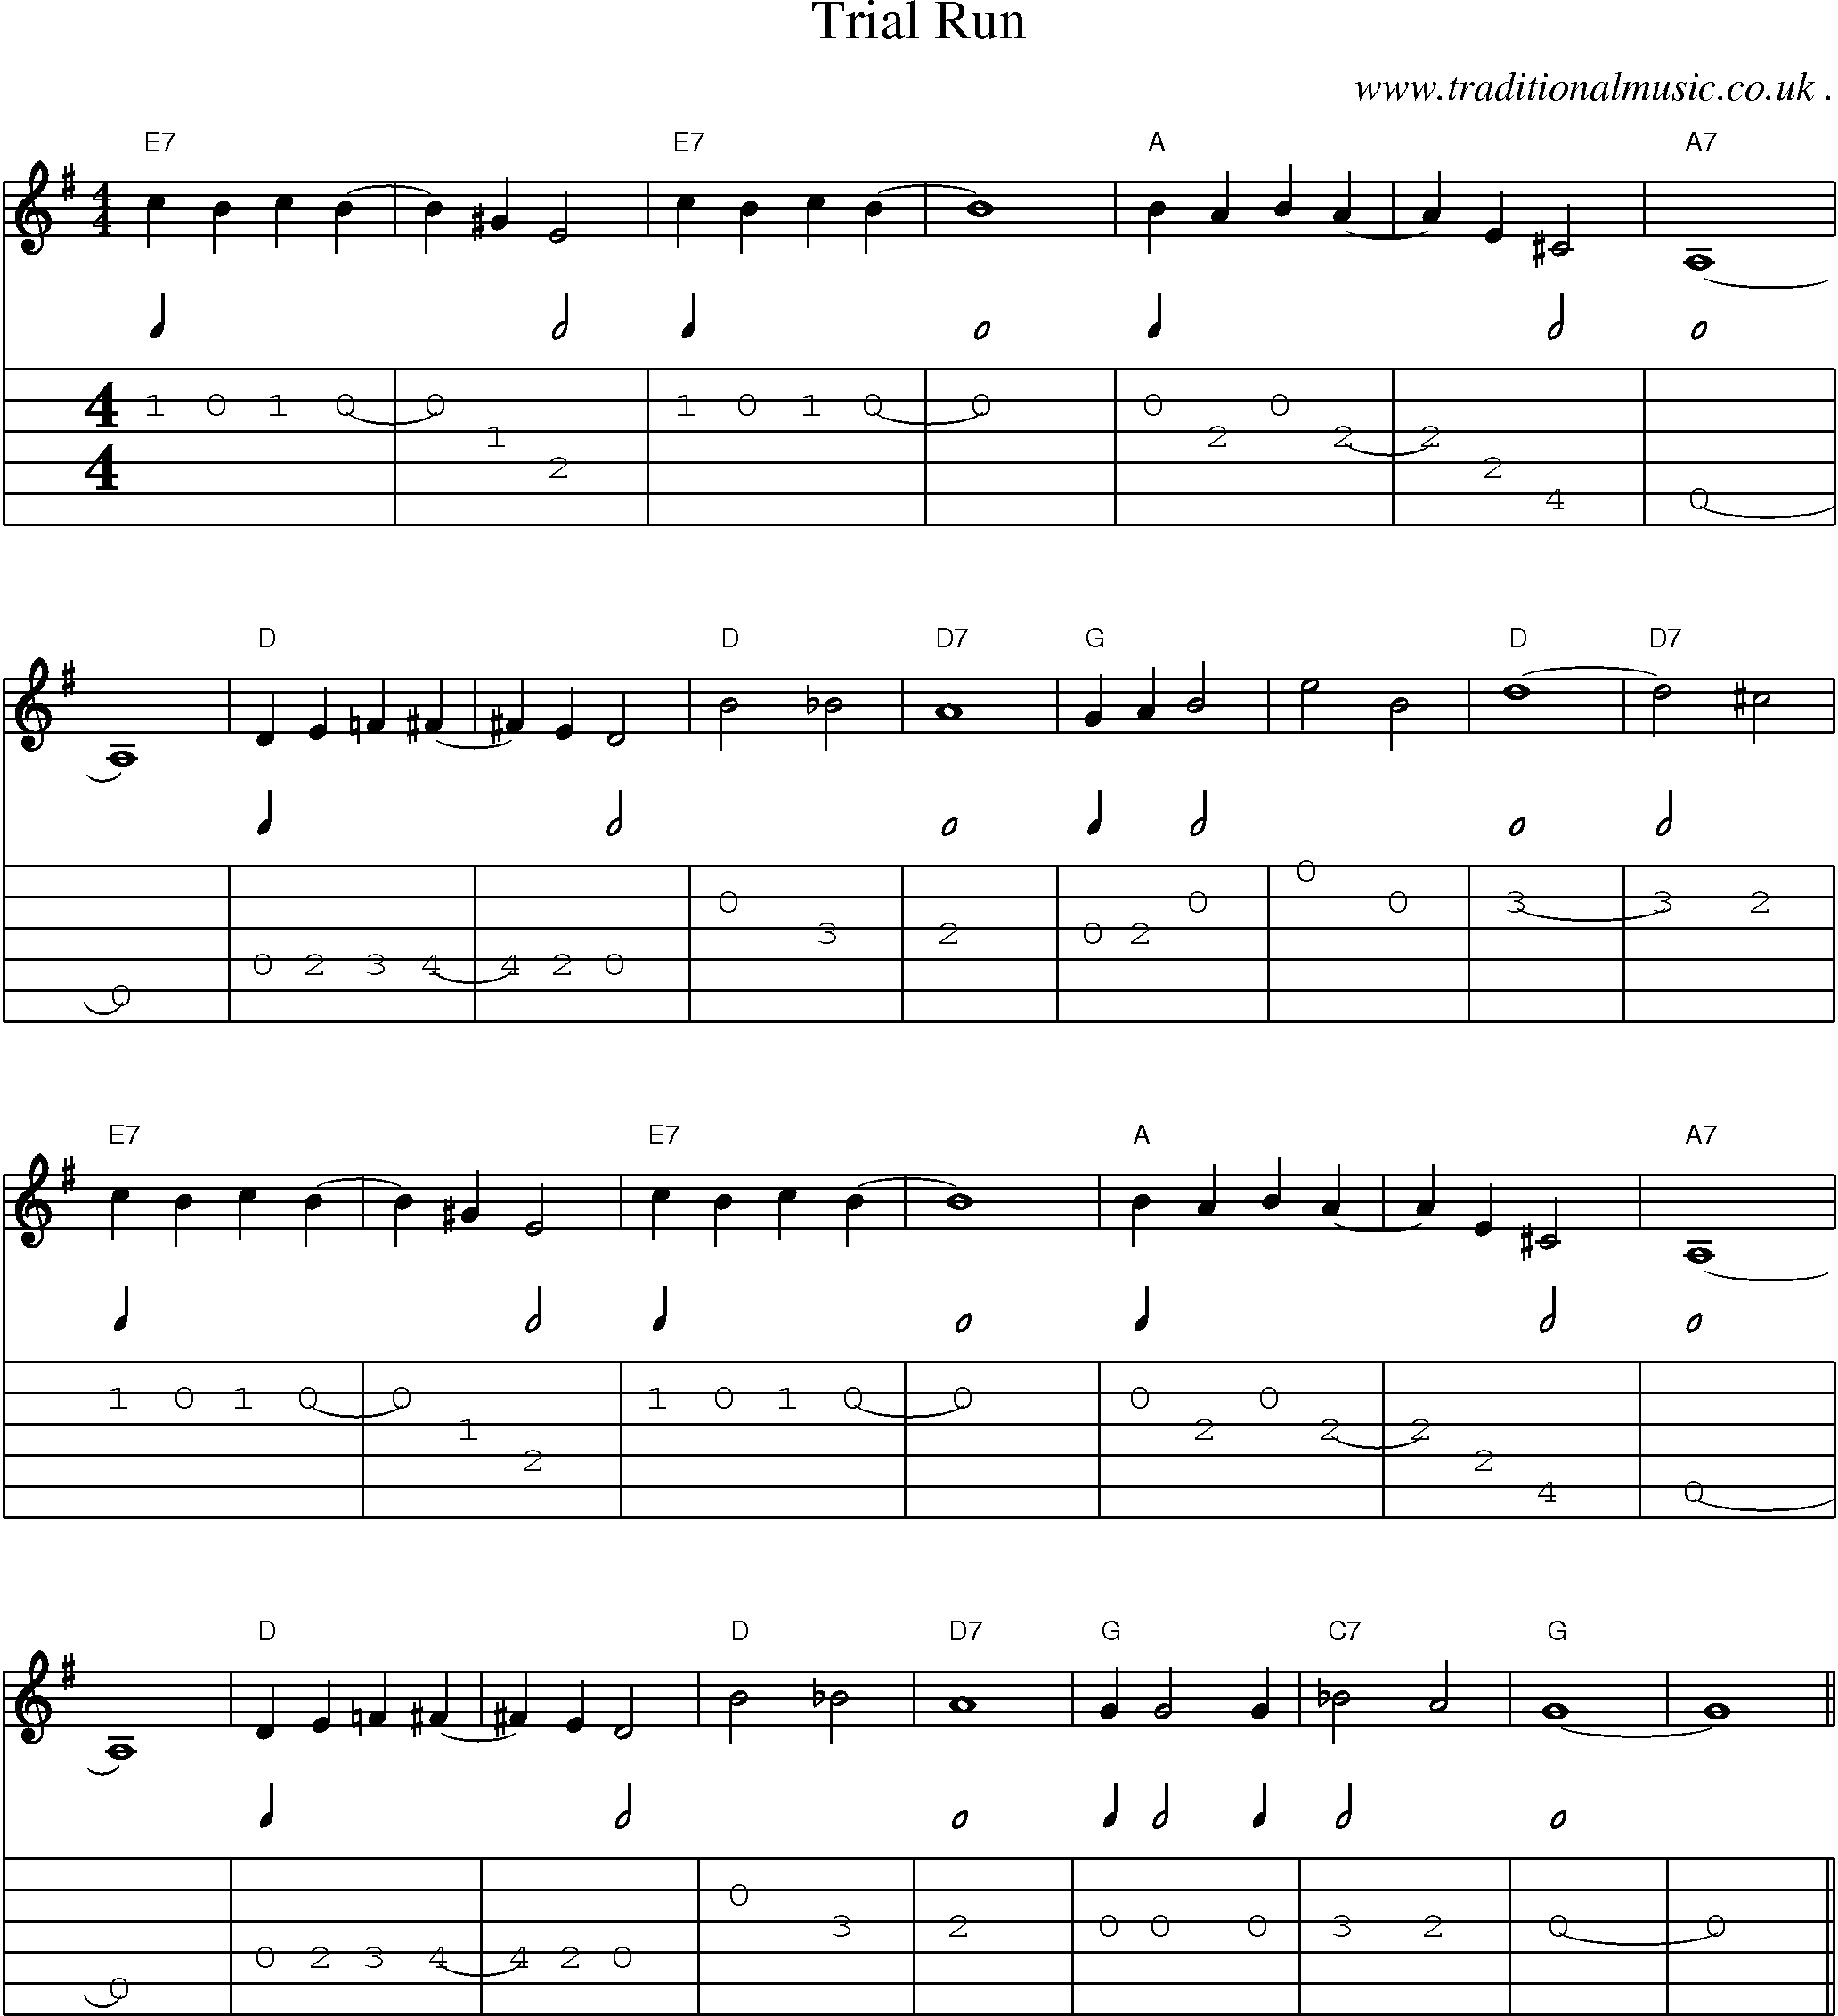 Sheet-Music and Guitar Tabs for Trial Run